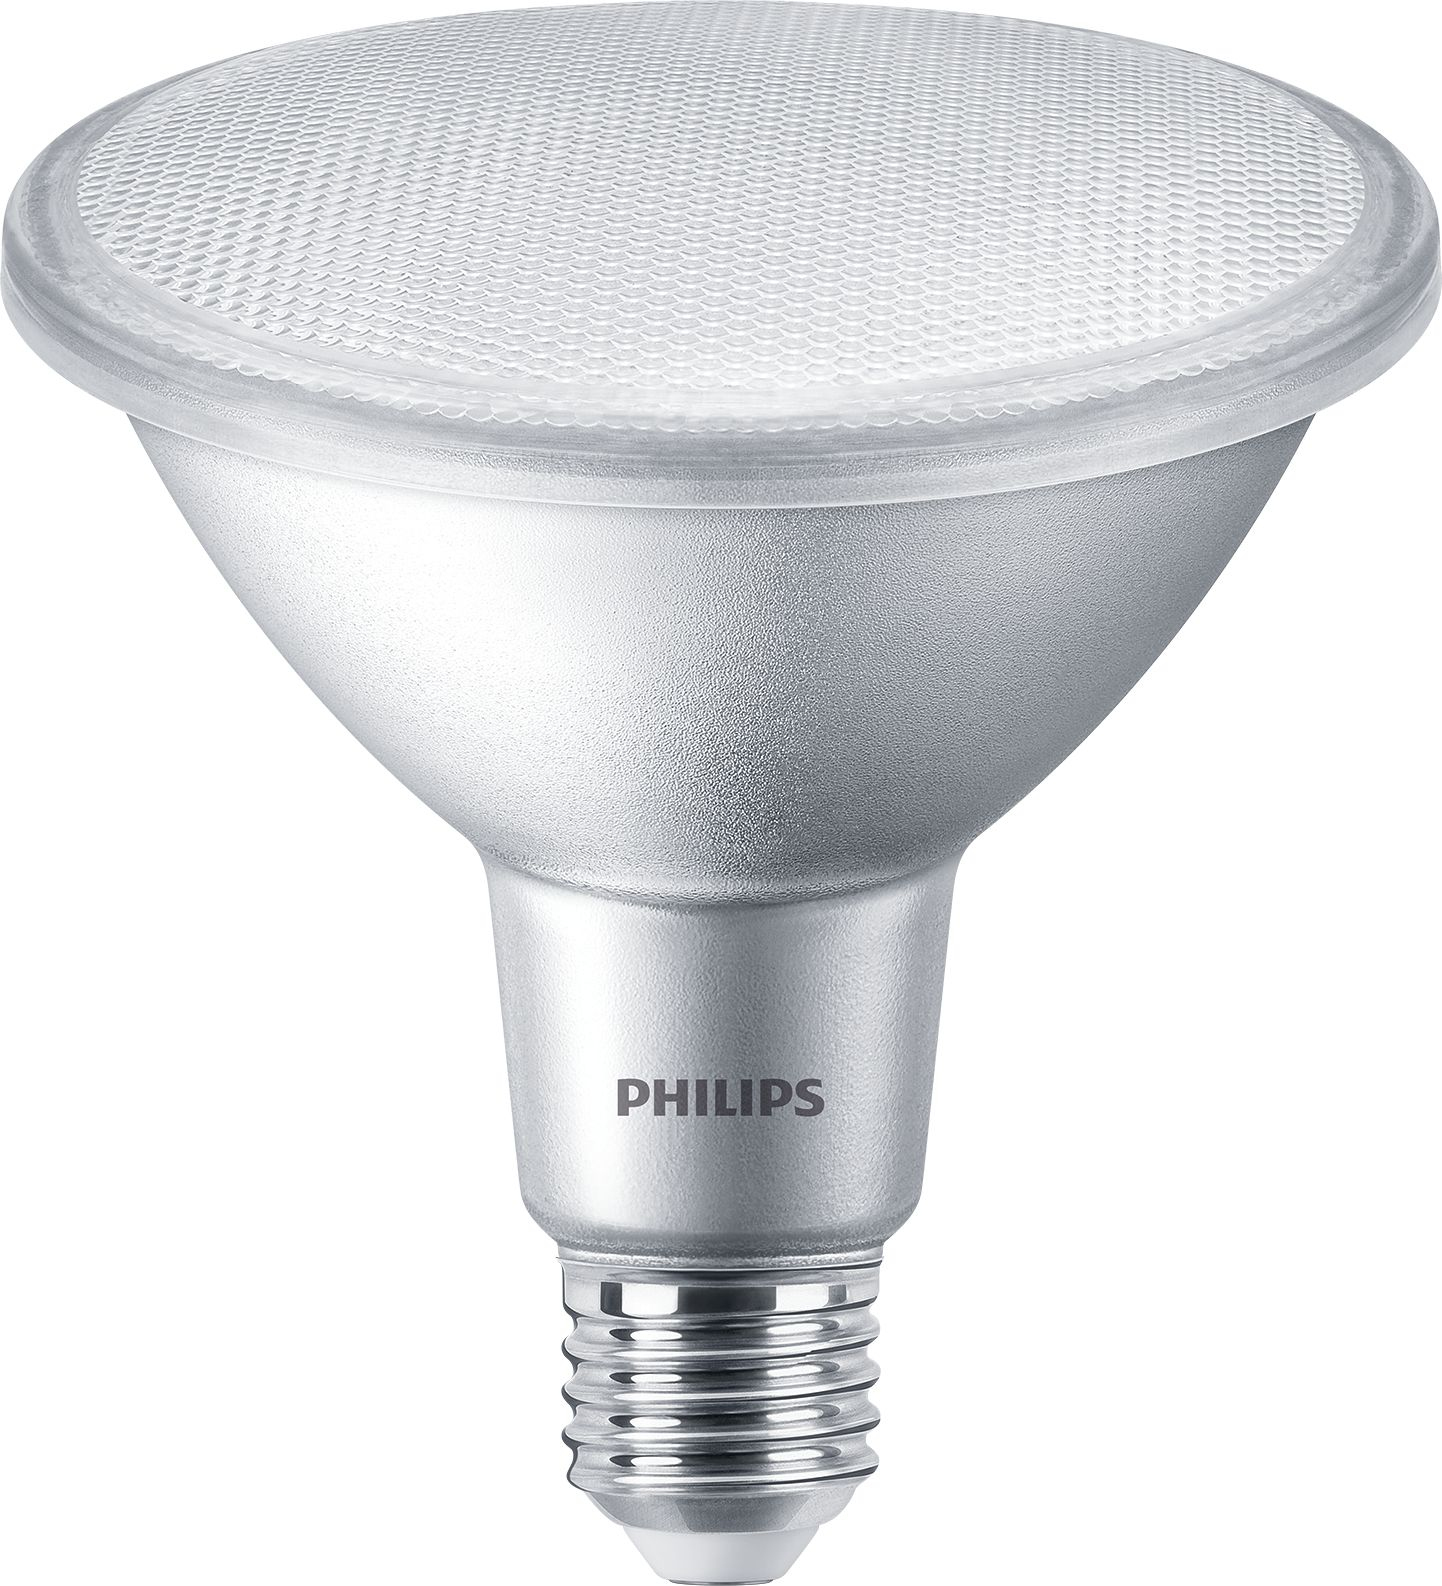 Philips by Signify Reflectorlamp (dimbaar)